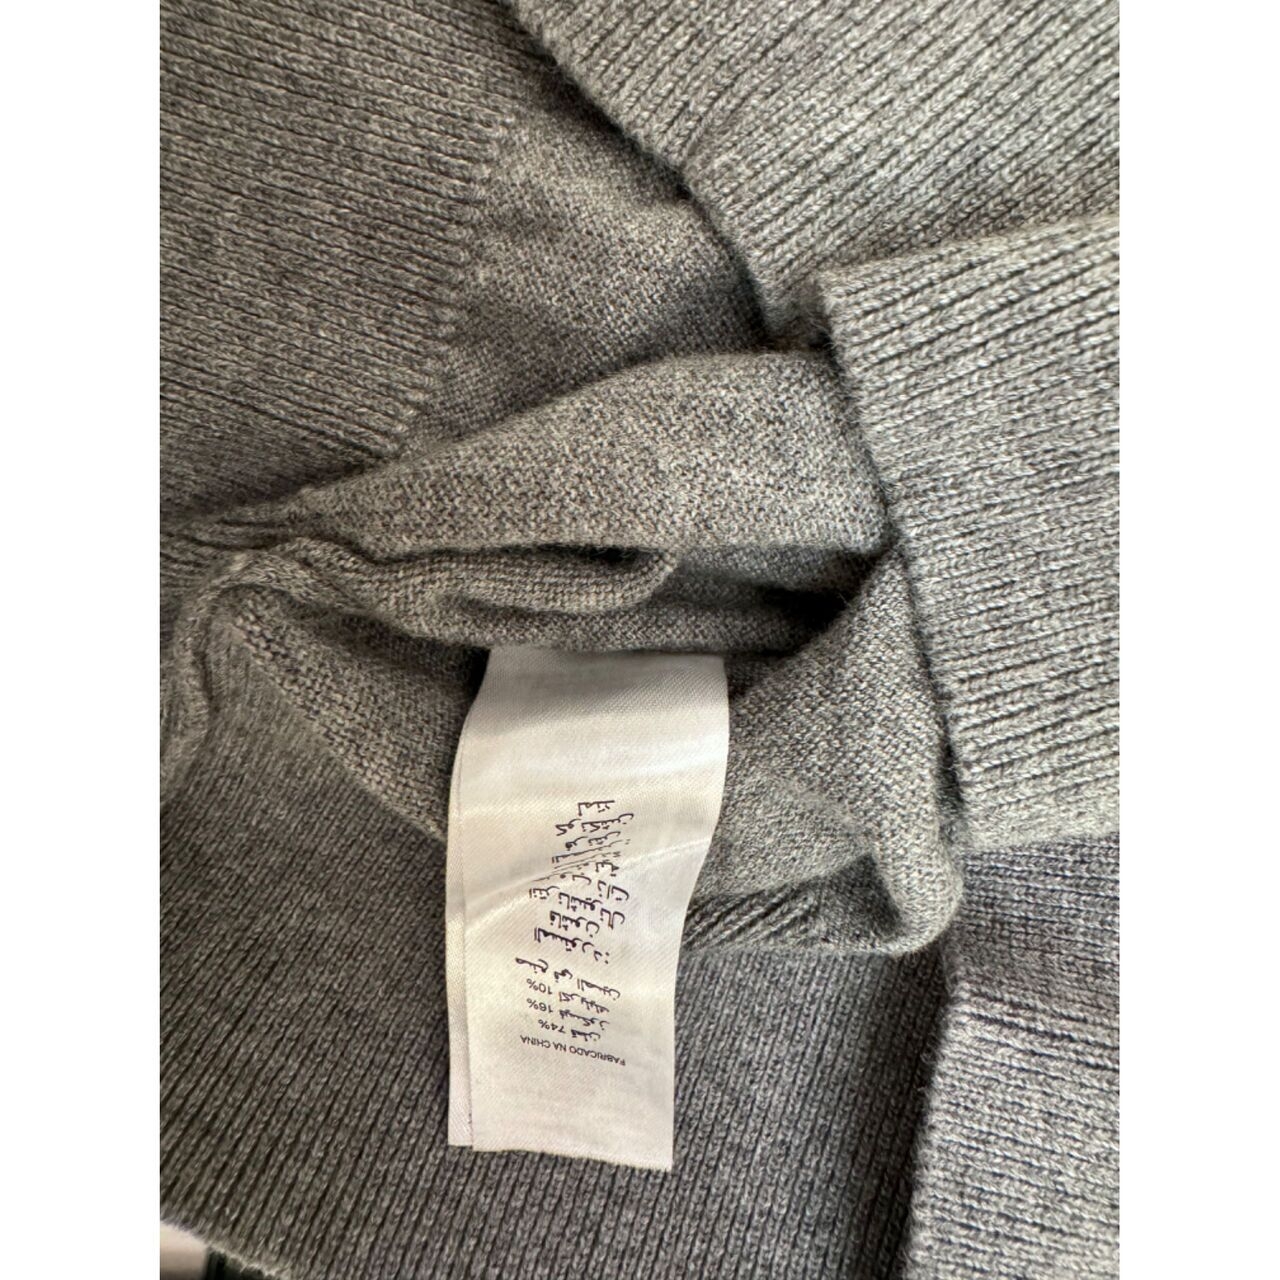 French Connection Grey Sweater